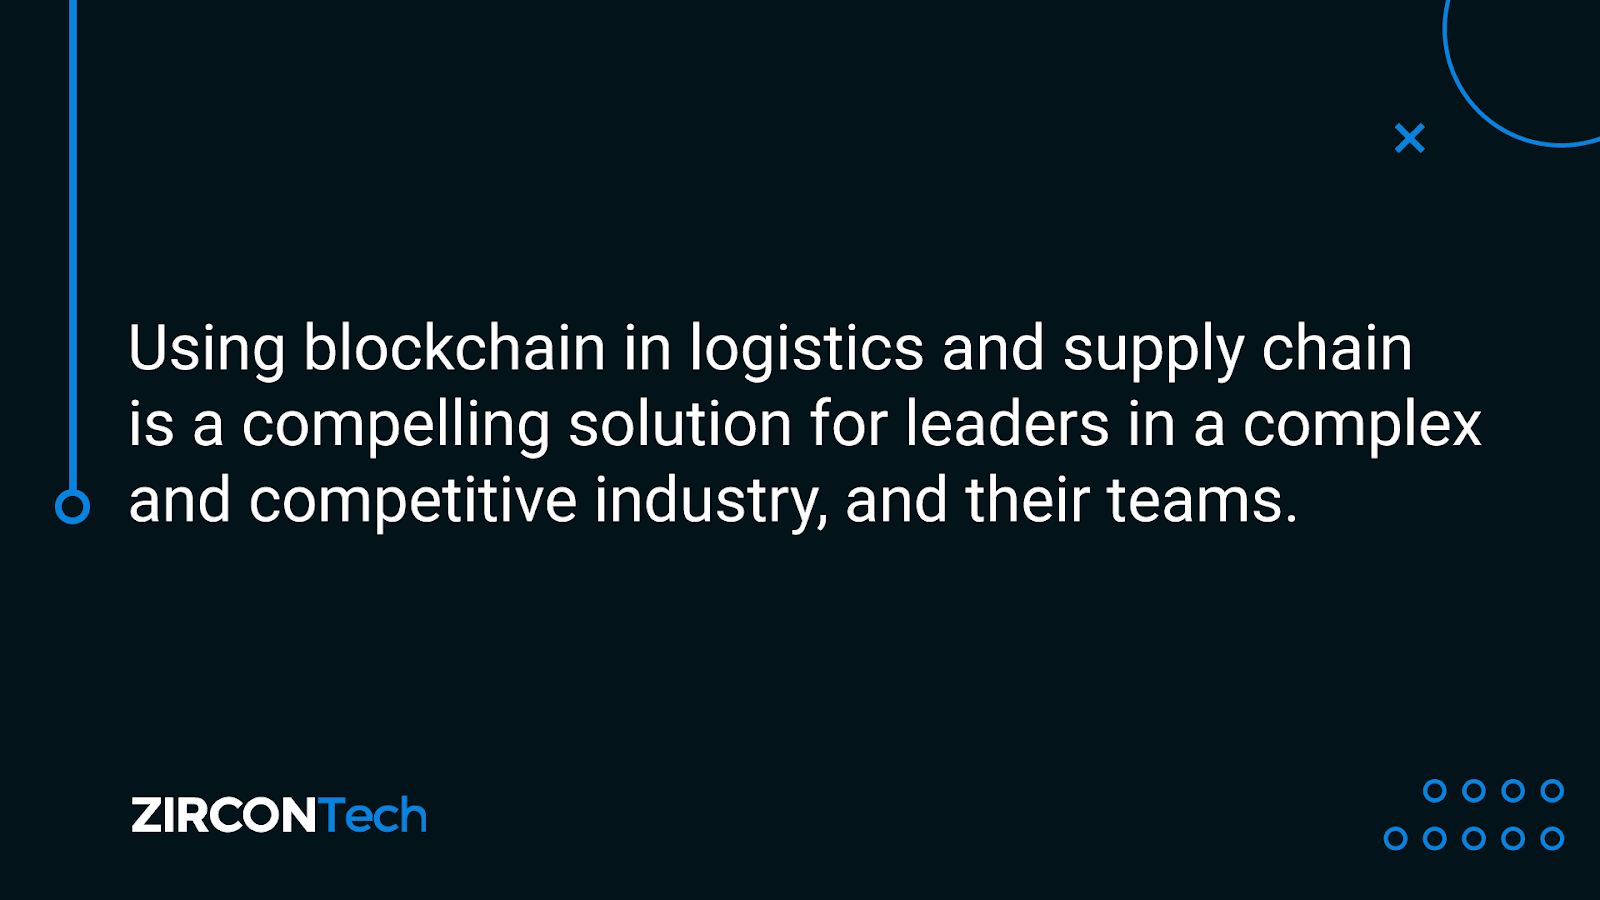 Using blockchain in logistics and supply chain is a compelling solution for leaders in a complex and competitive industry and their teamsUntitled